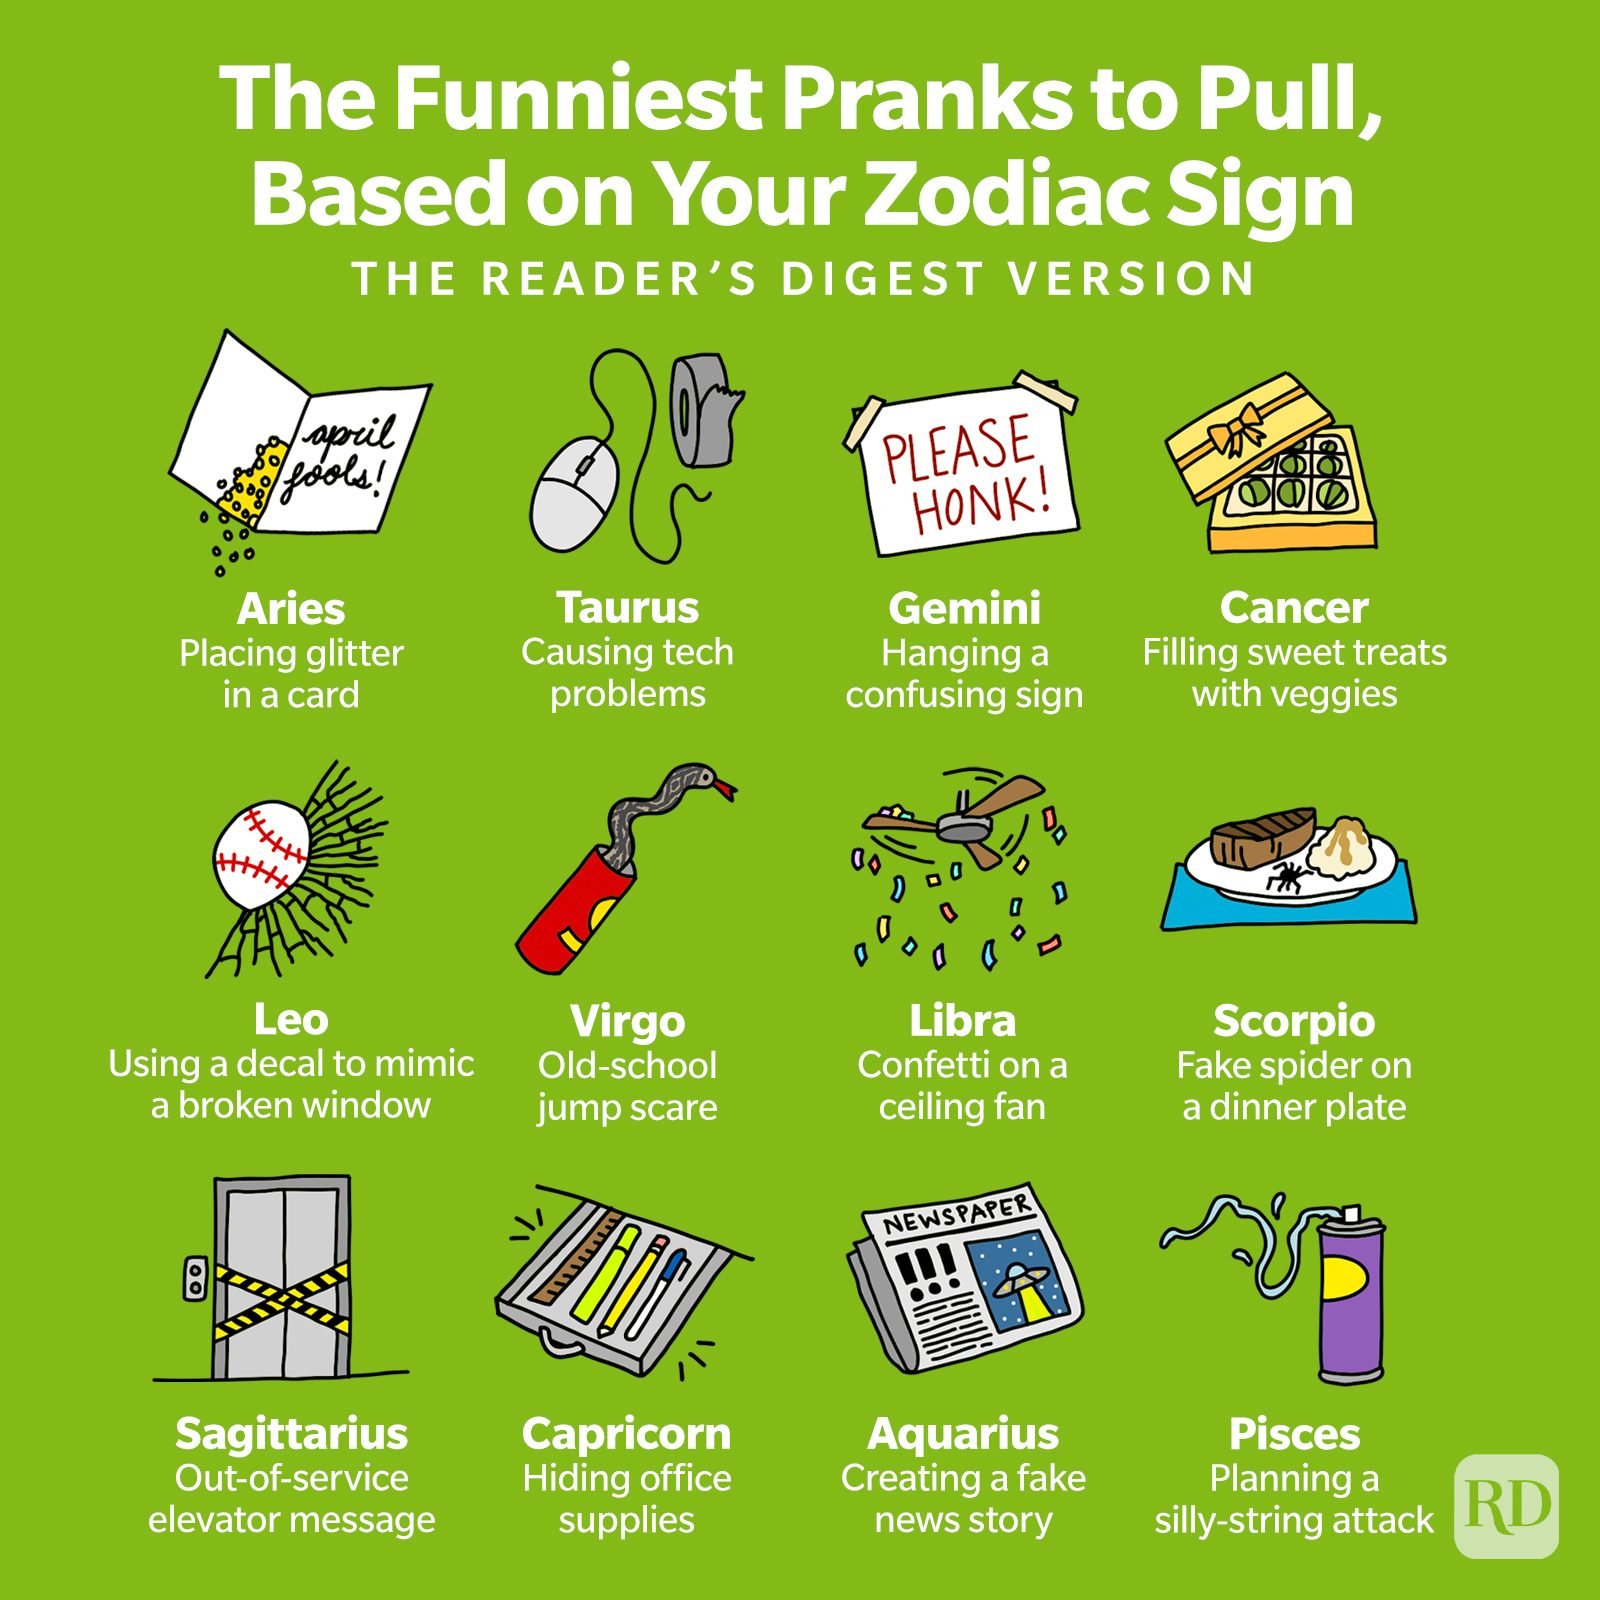 The Funniest Pranks To Pull Based On Your Zodiac Sign Infographic